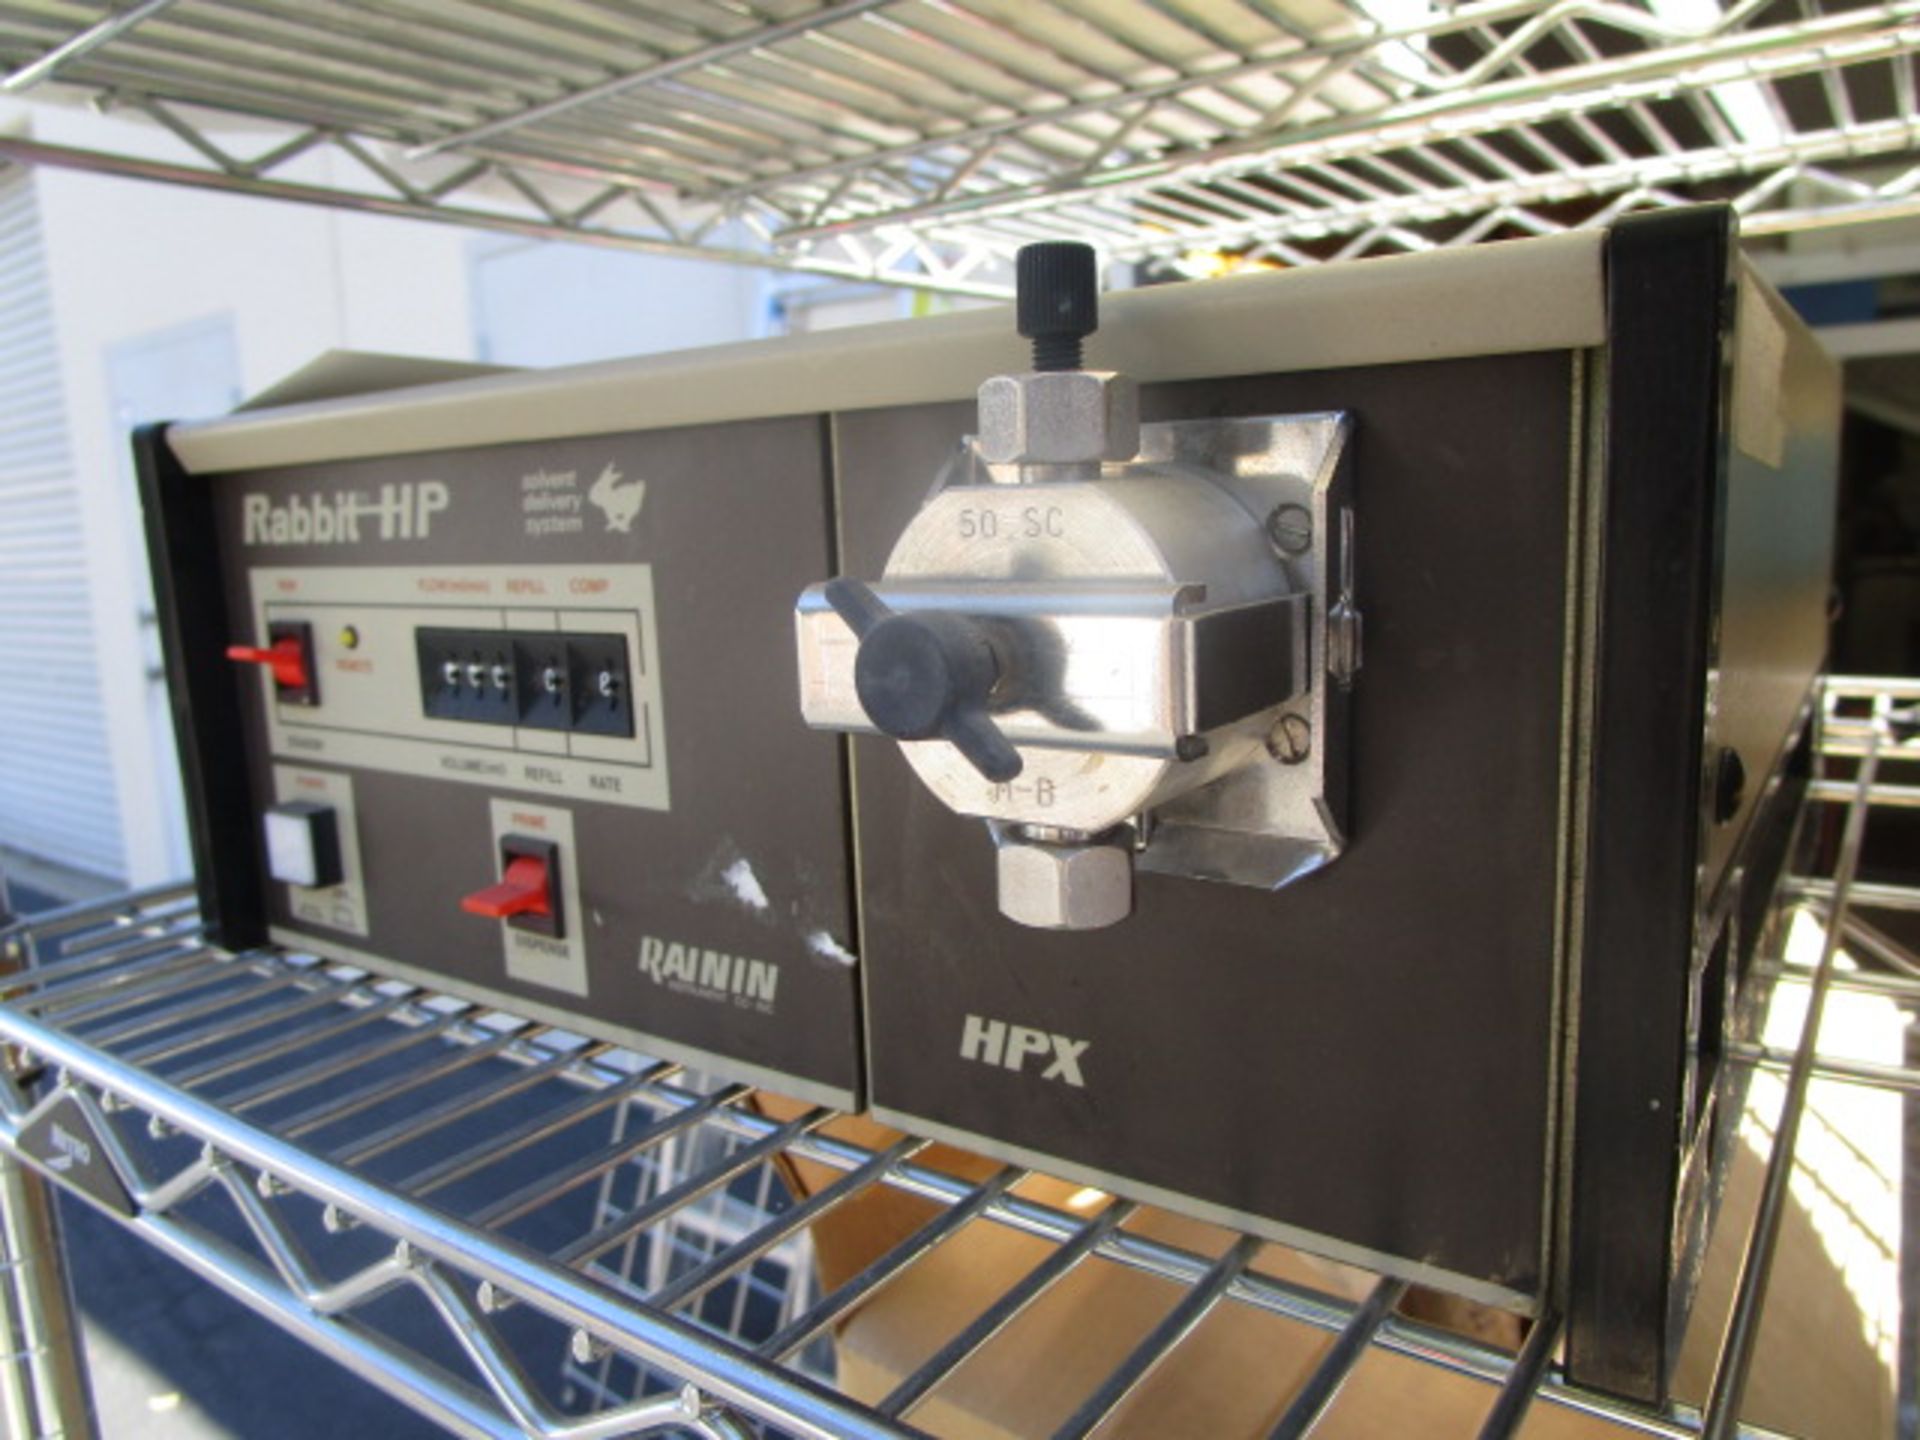 Ranin istruments Rabbit HP solvent delivery system - Image 5 of 5